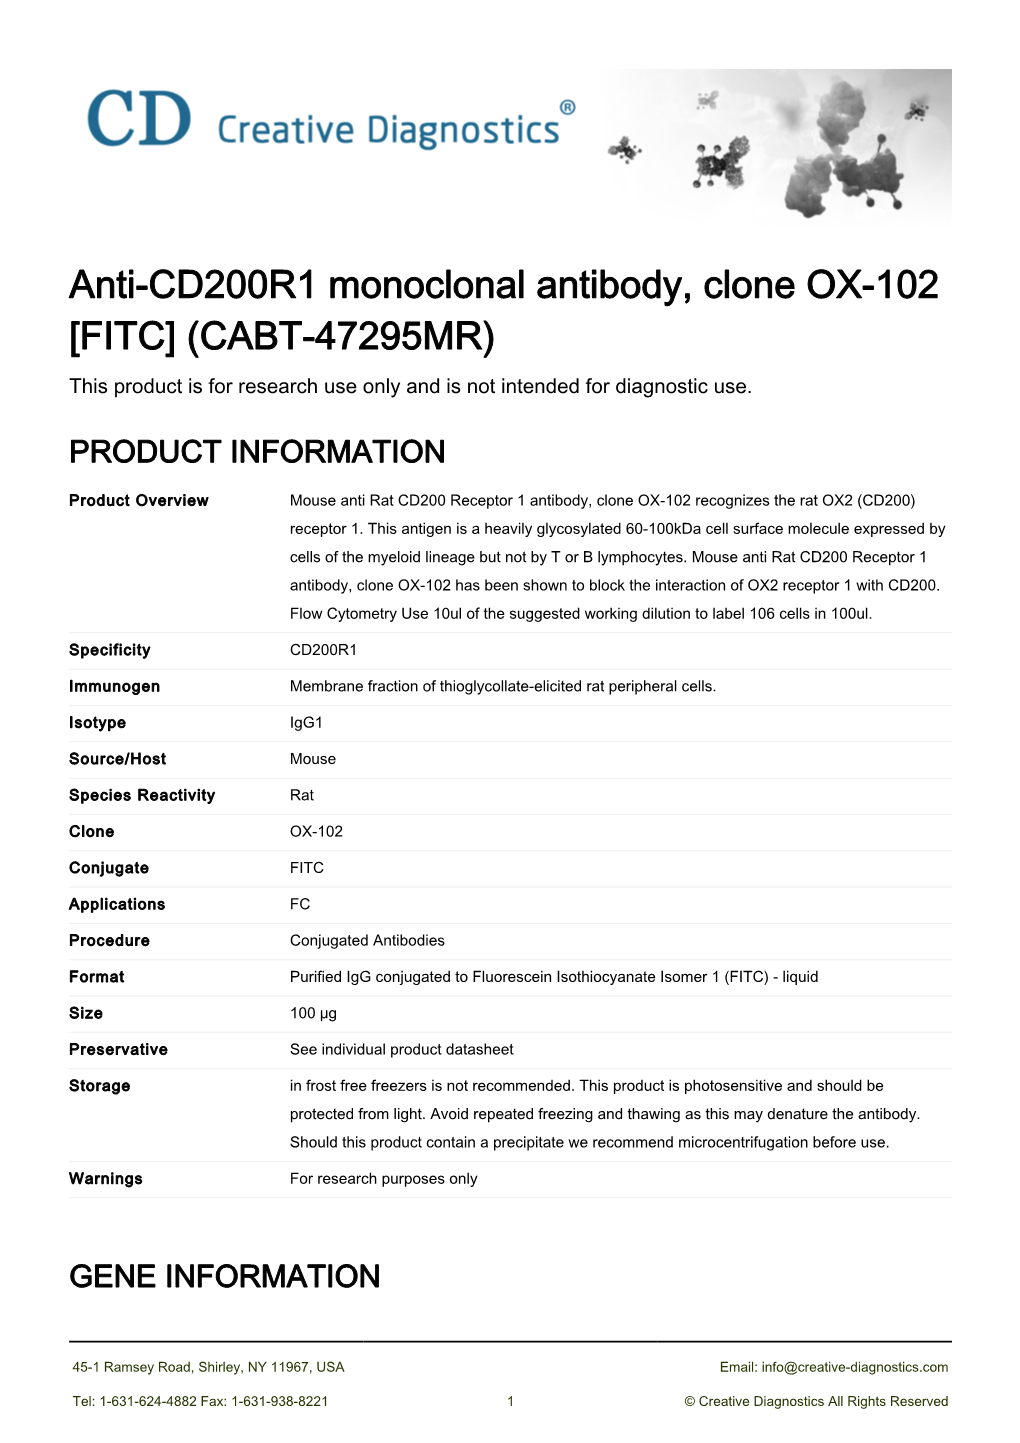 Anti-CD200R1 Monoclonal Antibody, Clone OX-102 [FITC] (CABT-47295MR) This Product Is for Research Use Only and Is Not Intended for Diagnostic Use